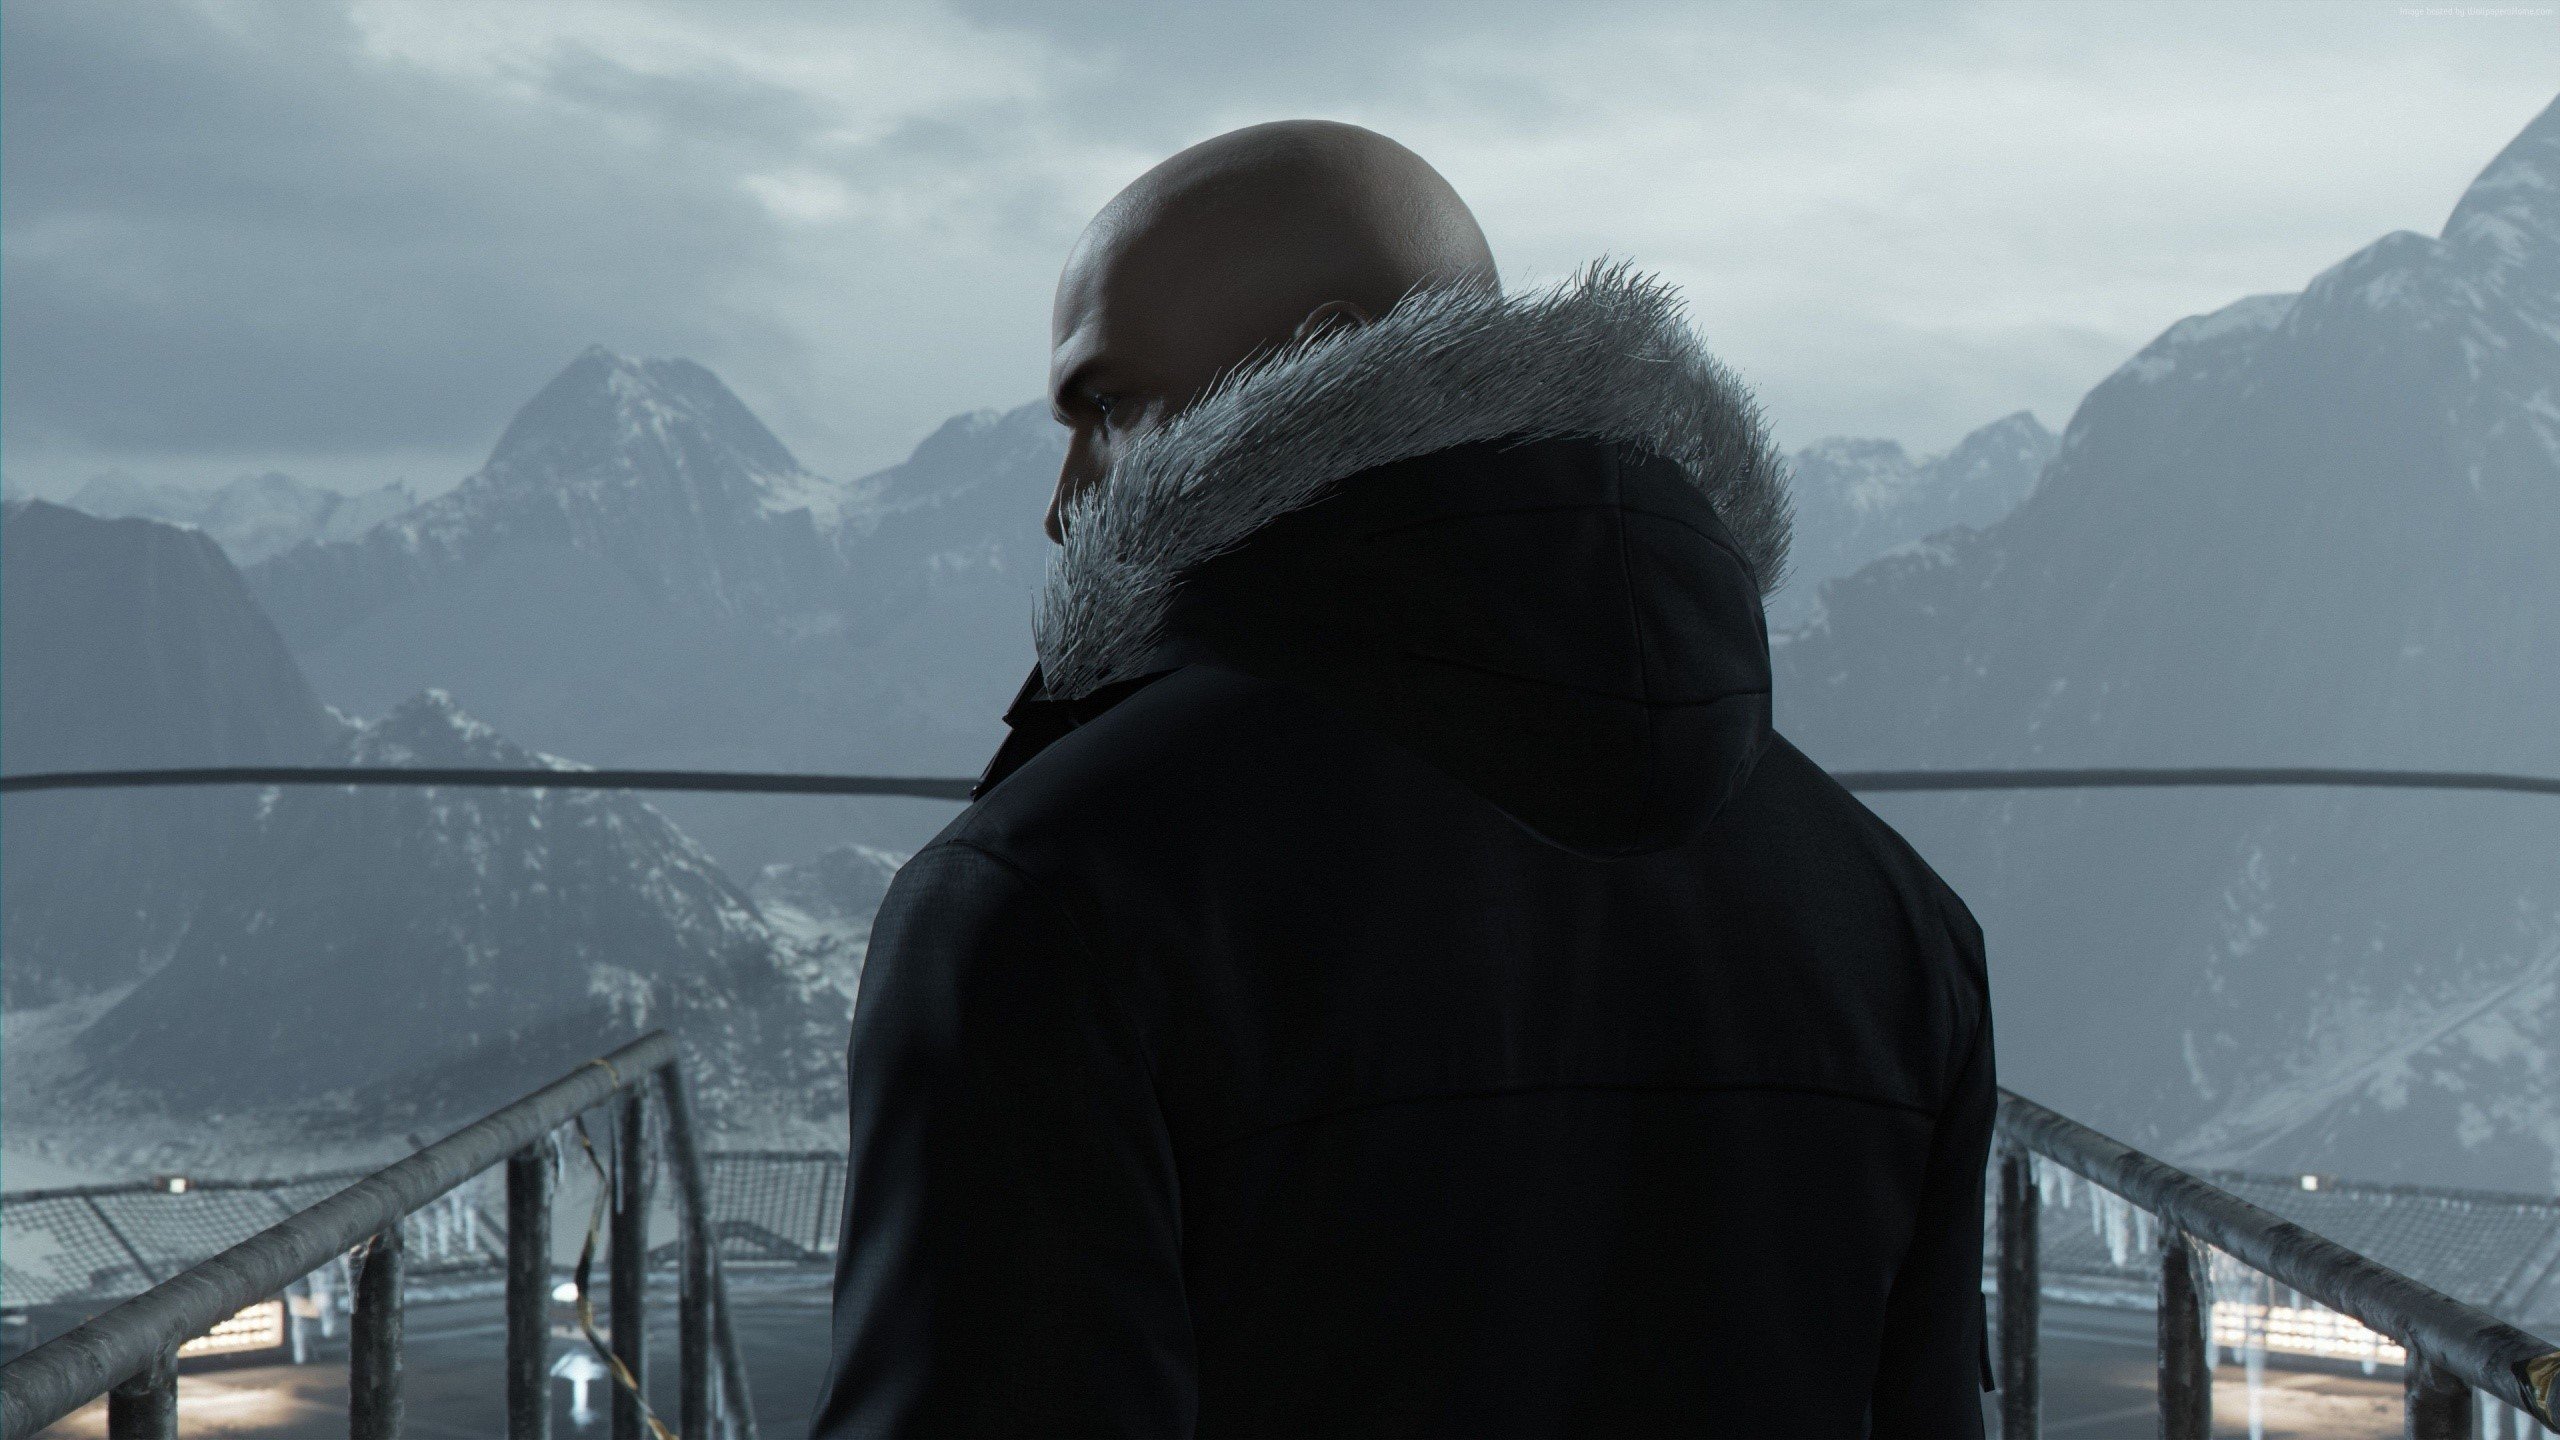 Wallpaper Agent 47 of the game Hitman